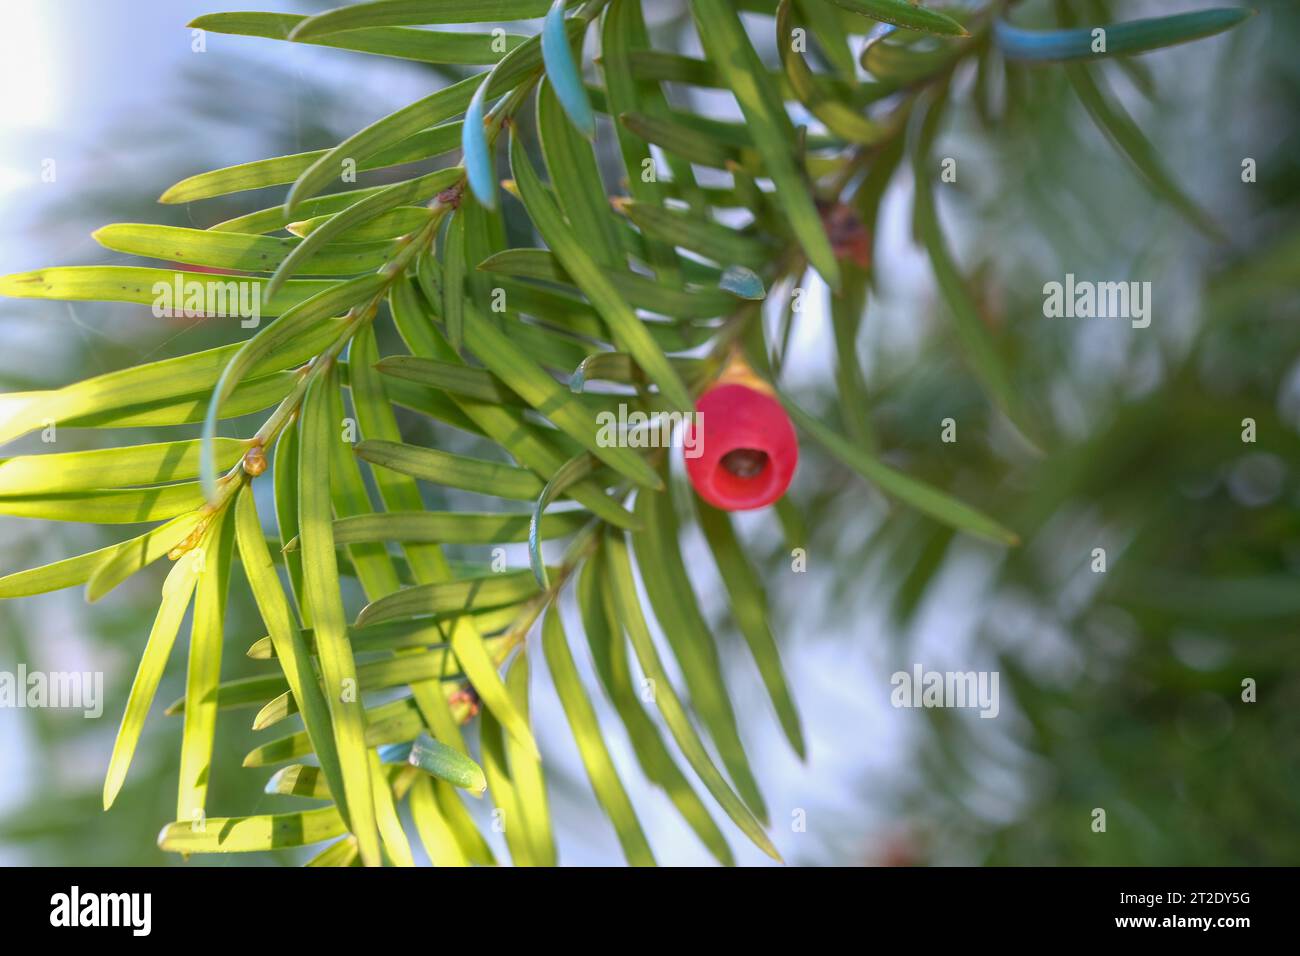 flower of the yew shrub Taxus baccata. High quality photo Stock Photo